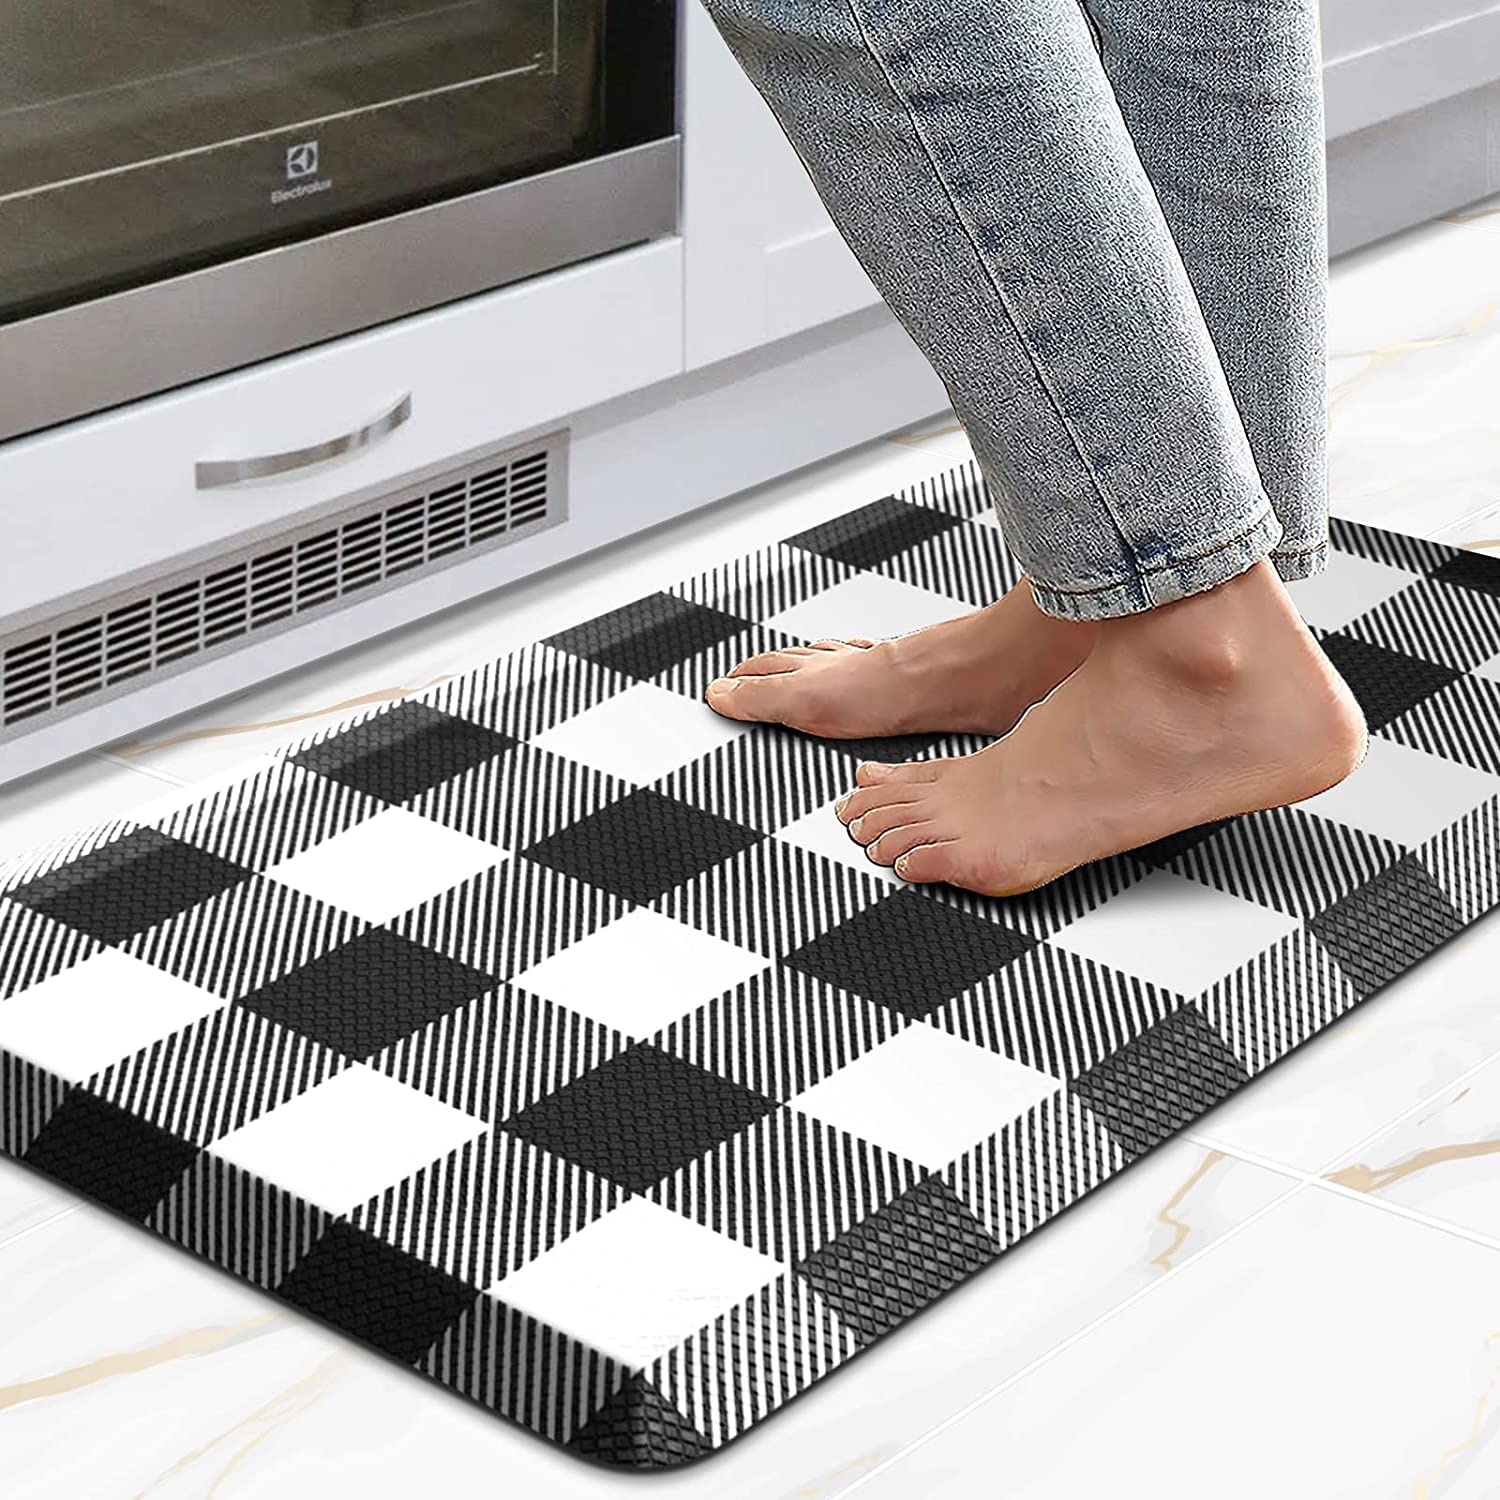 Anti Fatigue Kitchen Floor Mat, Standing Desk Mat, Cushioned Comfort Mat  for Home, Office, Laundry,Pain Relief, Non Slip Bottom, Waterproof & Easy  to